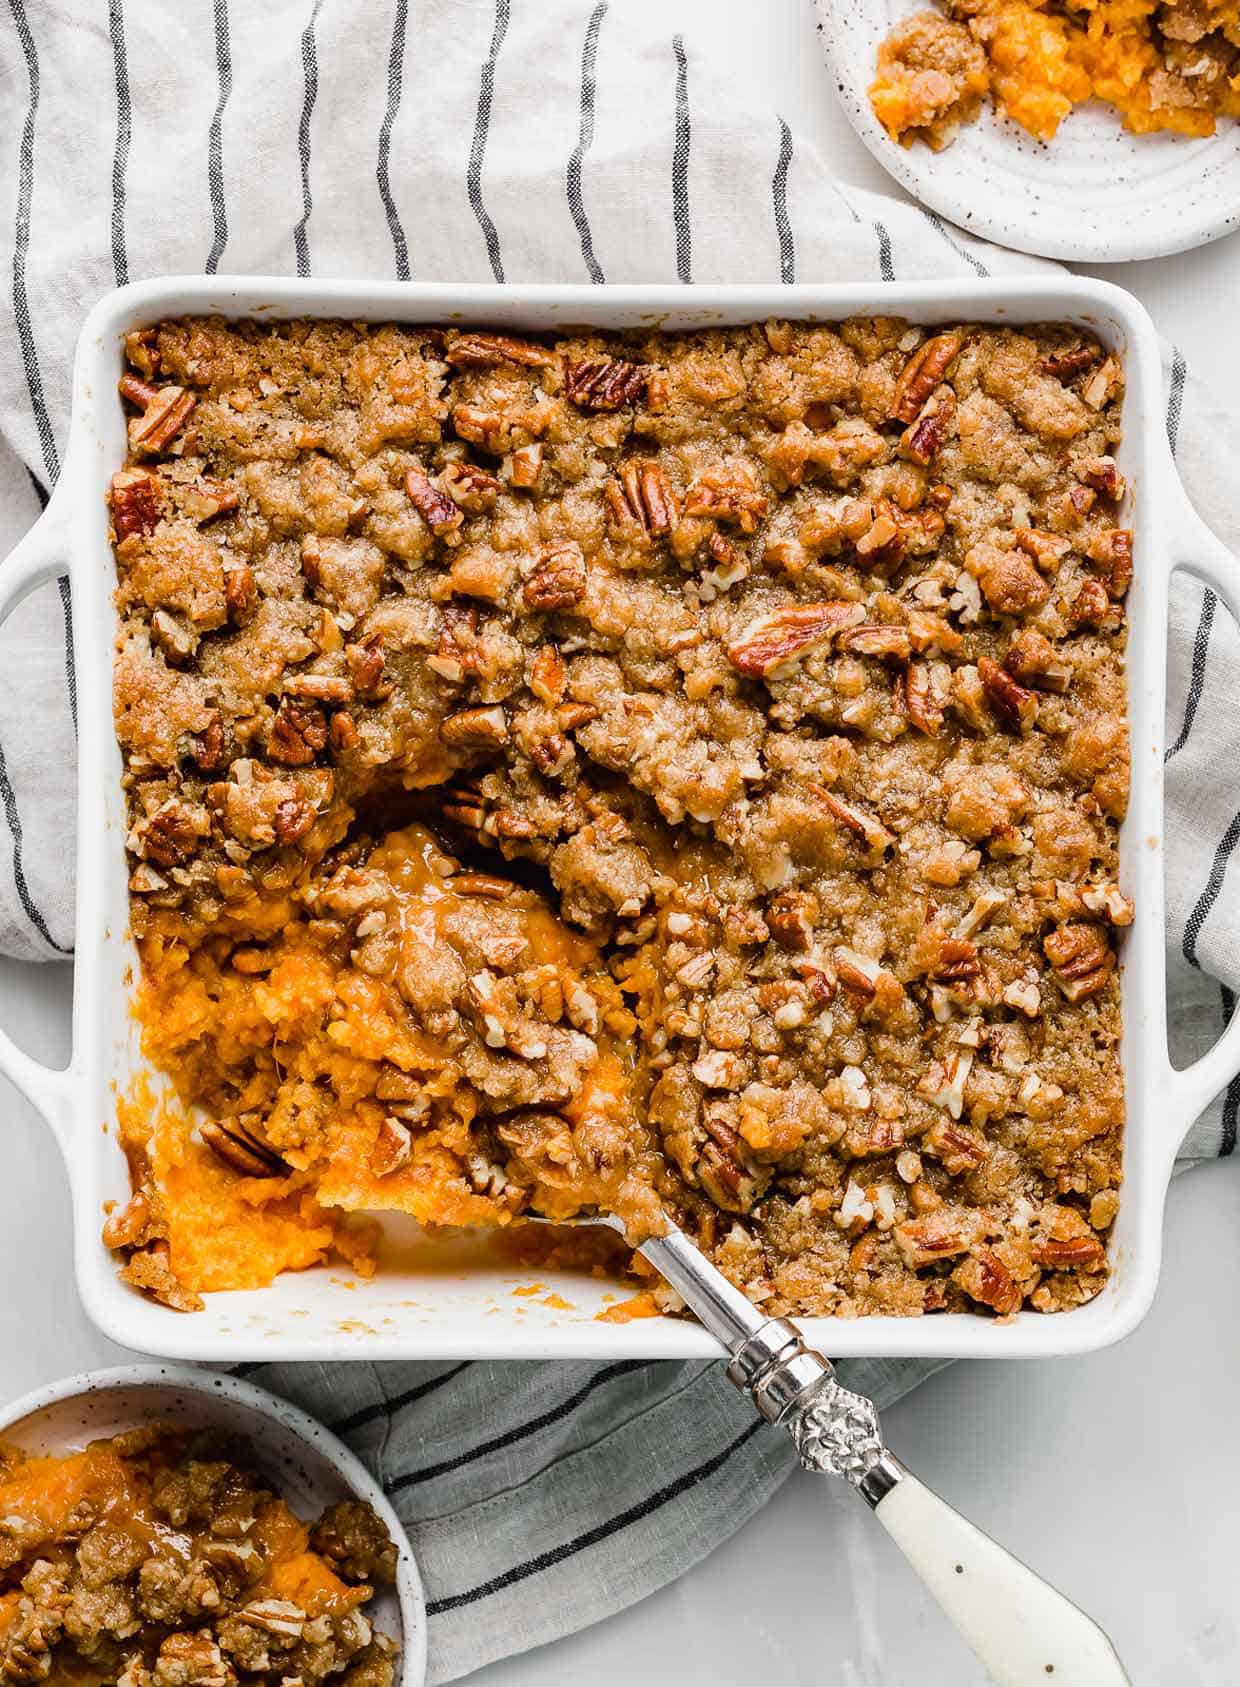 A serving spoon scooping out Easy Sweet Potato Casserole from a white square baking dish.